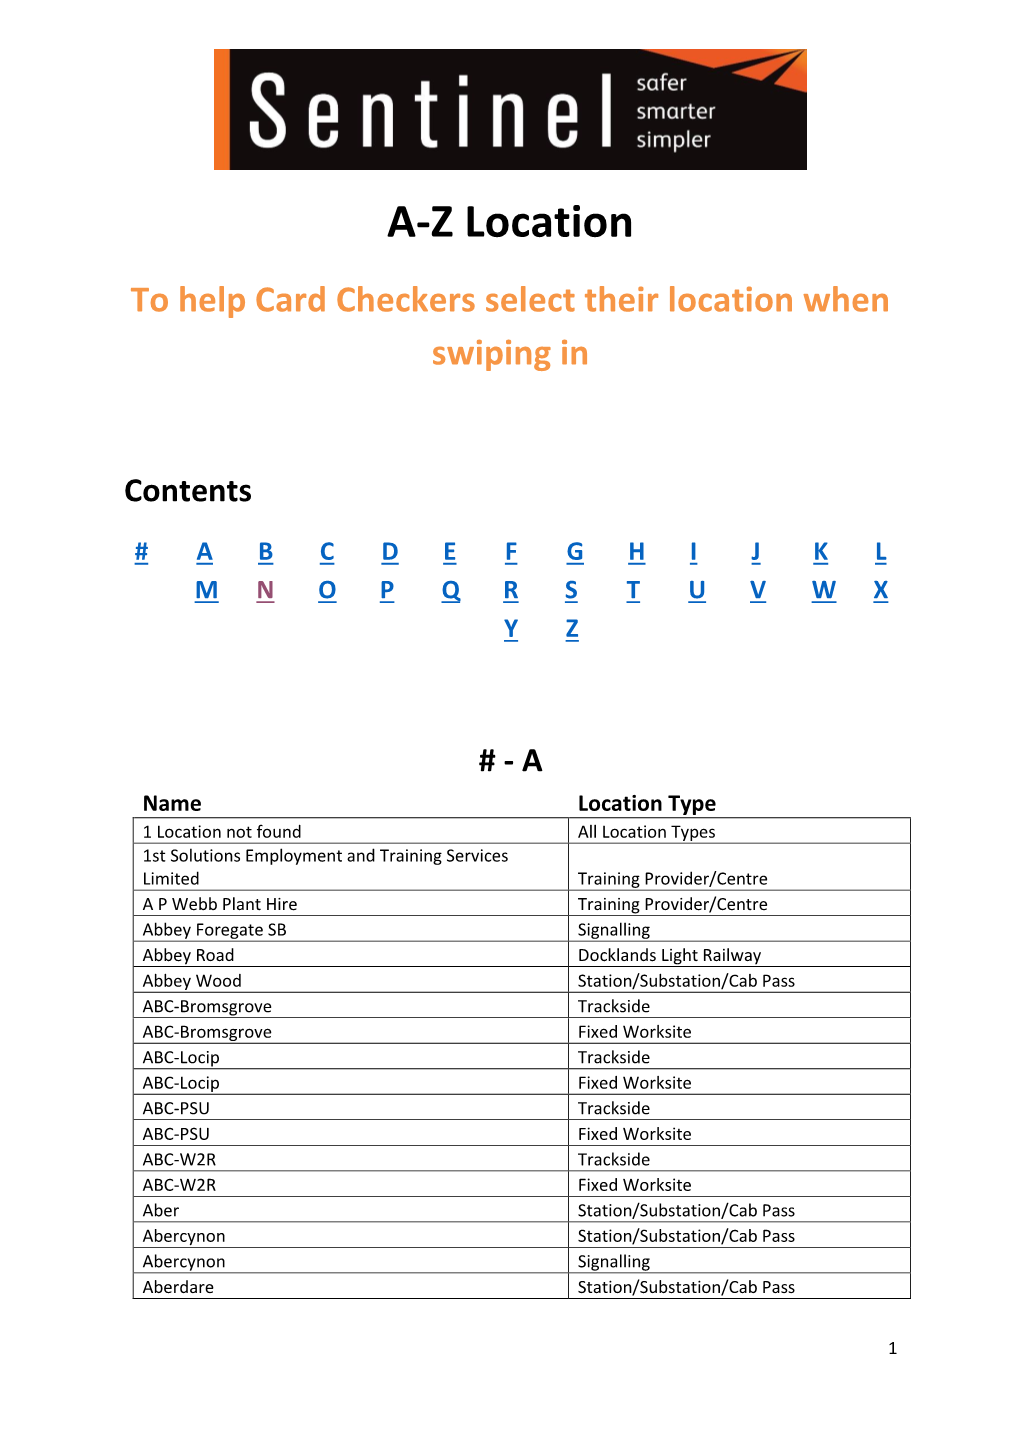 A-Z Location to Help Card Checkers Select Their Location When Swiping In